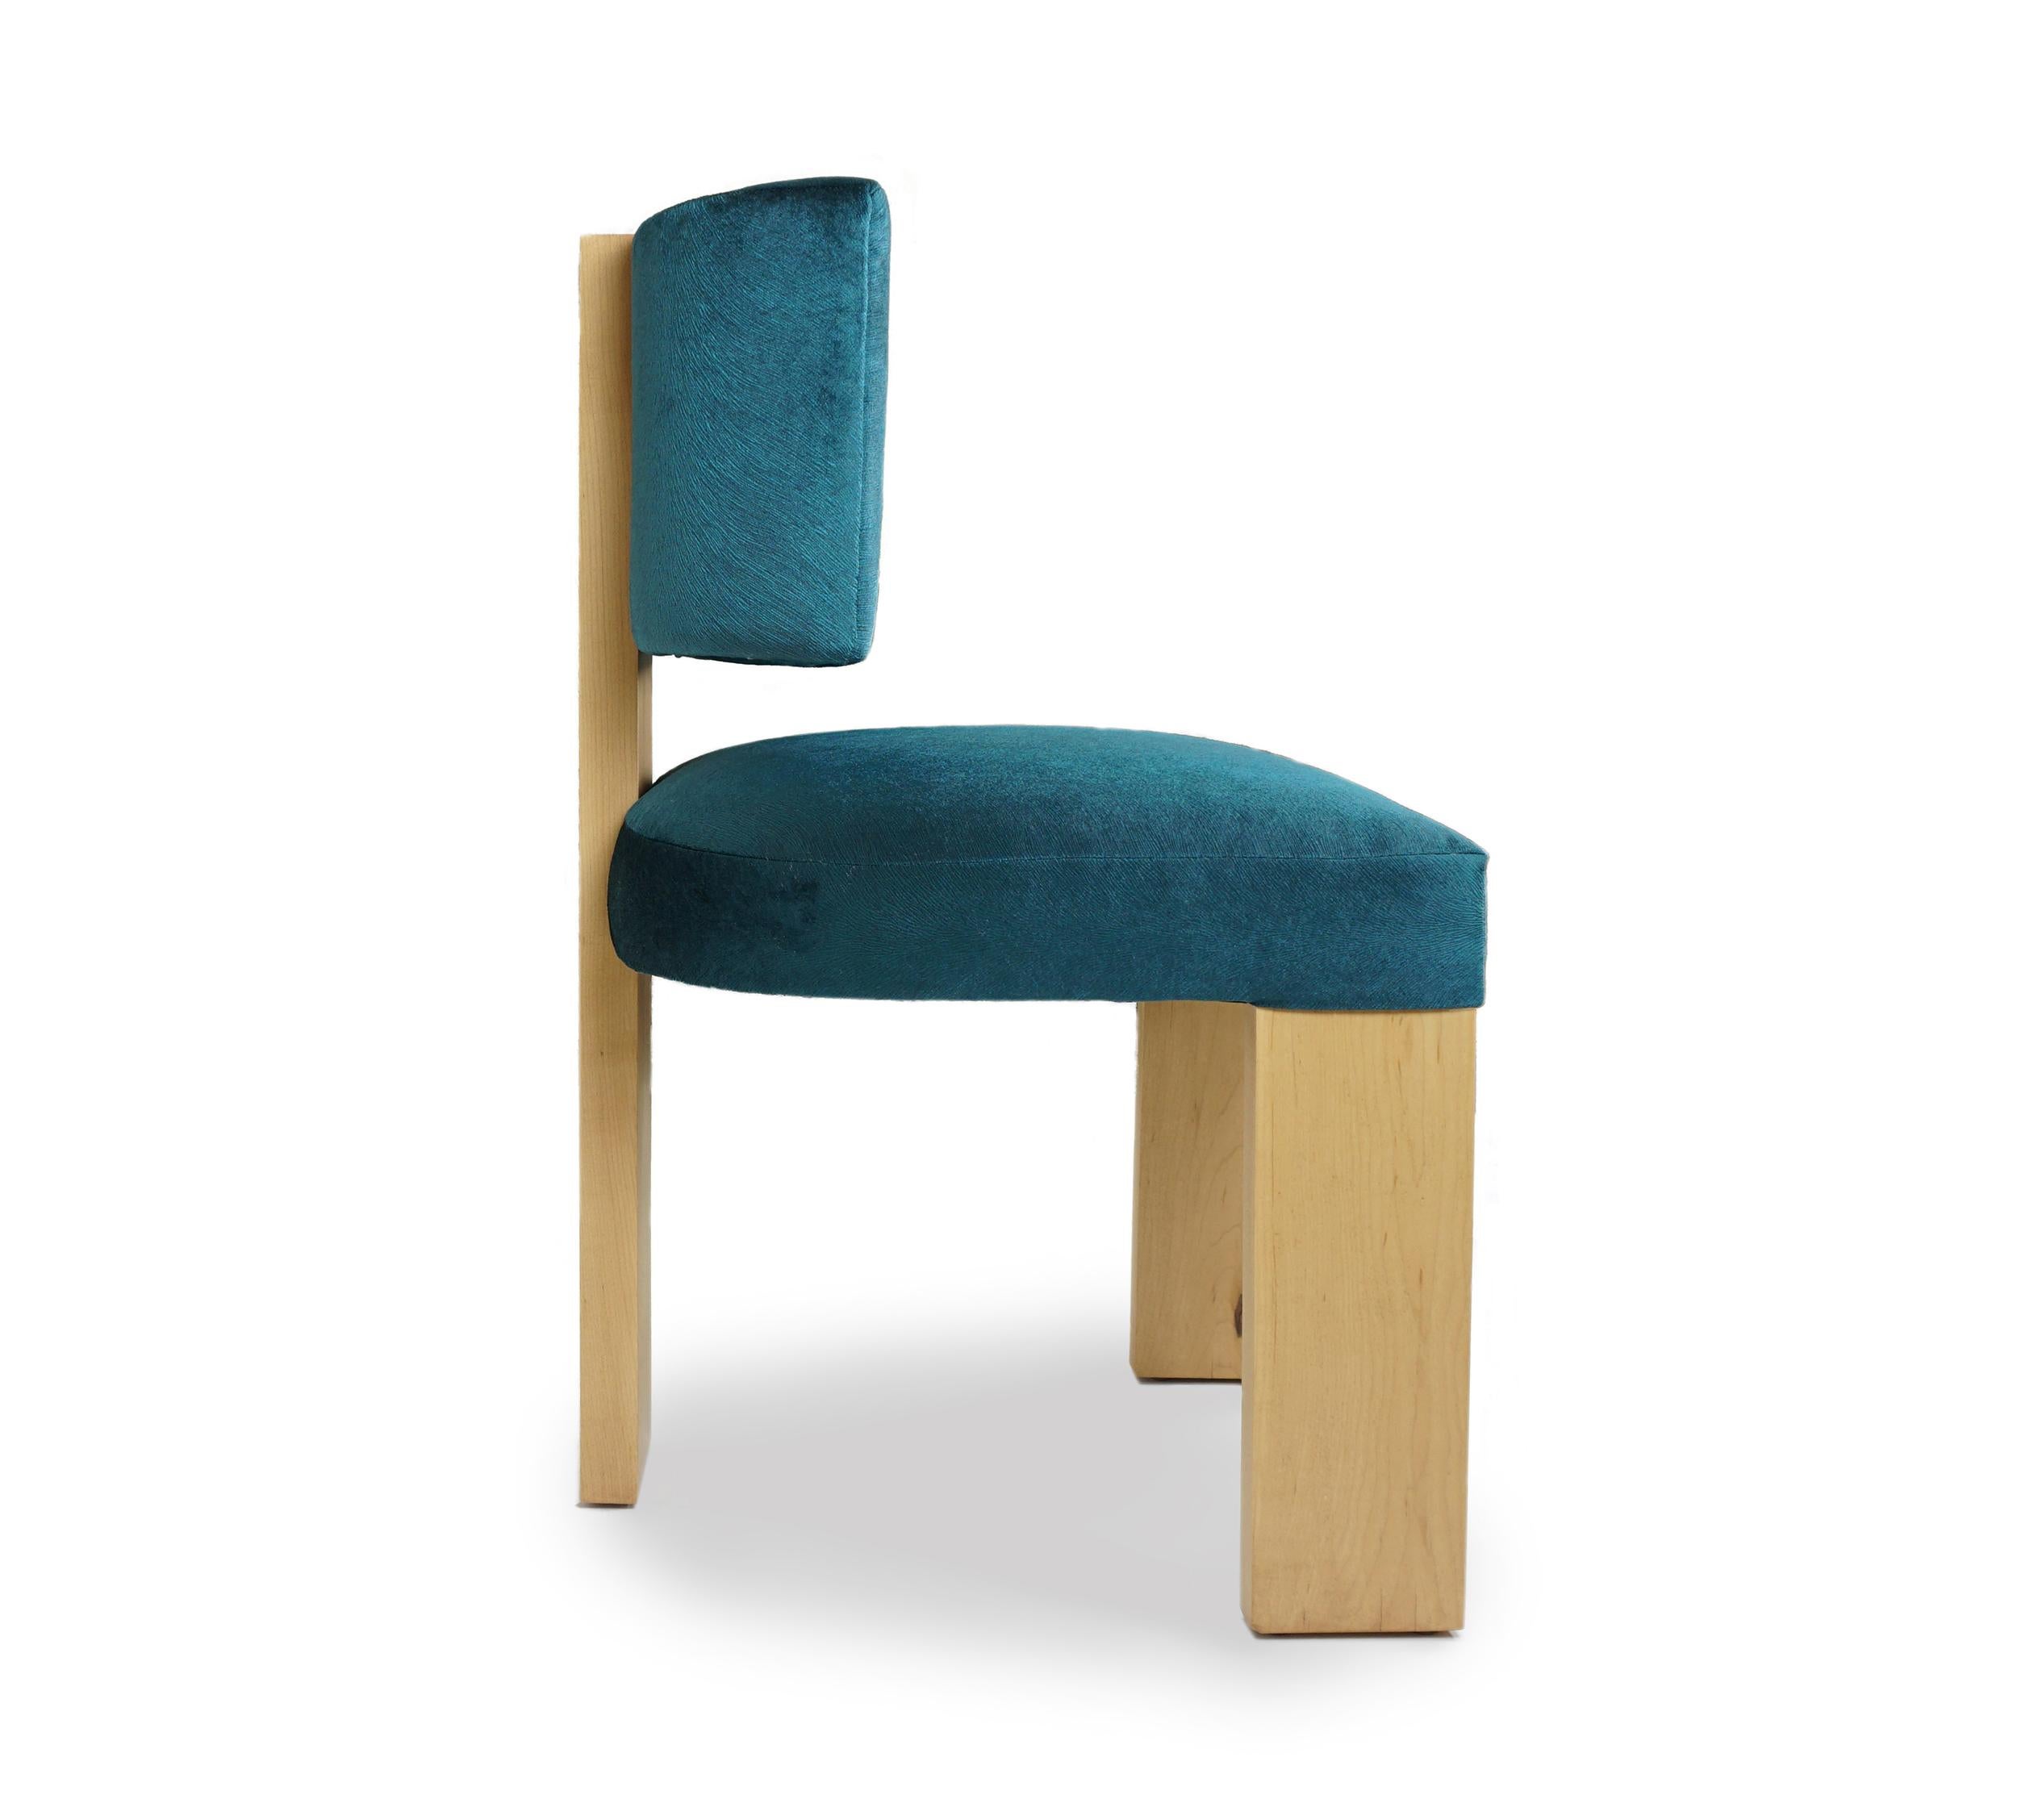 About this piece
This customizable dining chair is made with a solid hard maple frame. From the back the piece has a striking visual impact and its also surprisingly comfortable, cradling the back just below the shoulder blades and offering ample